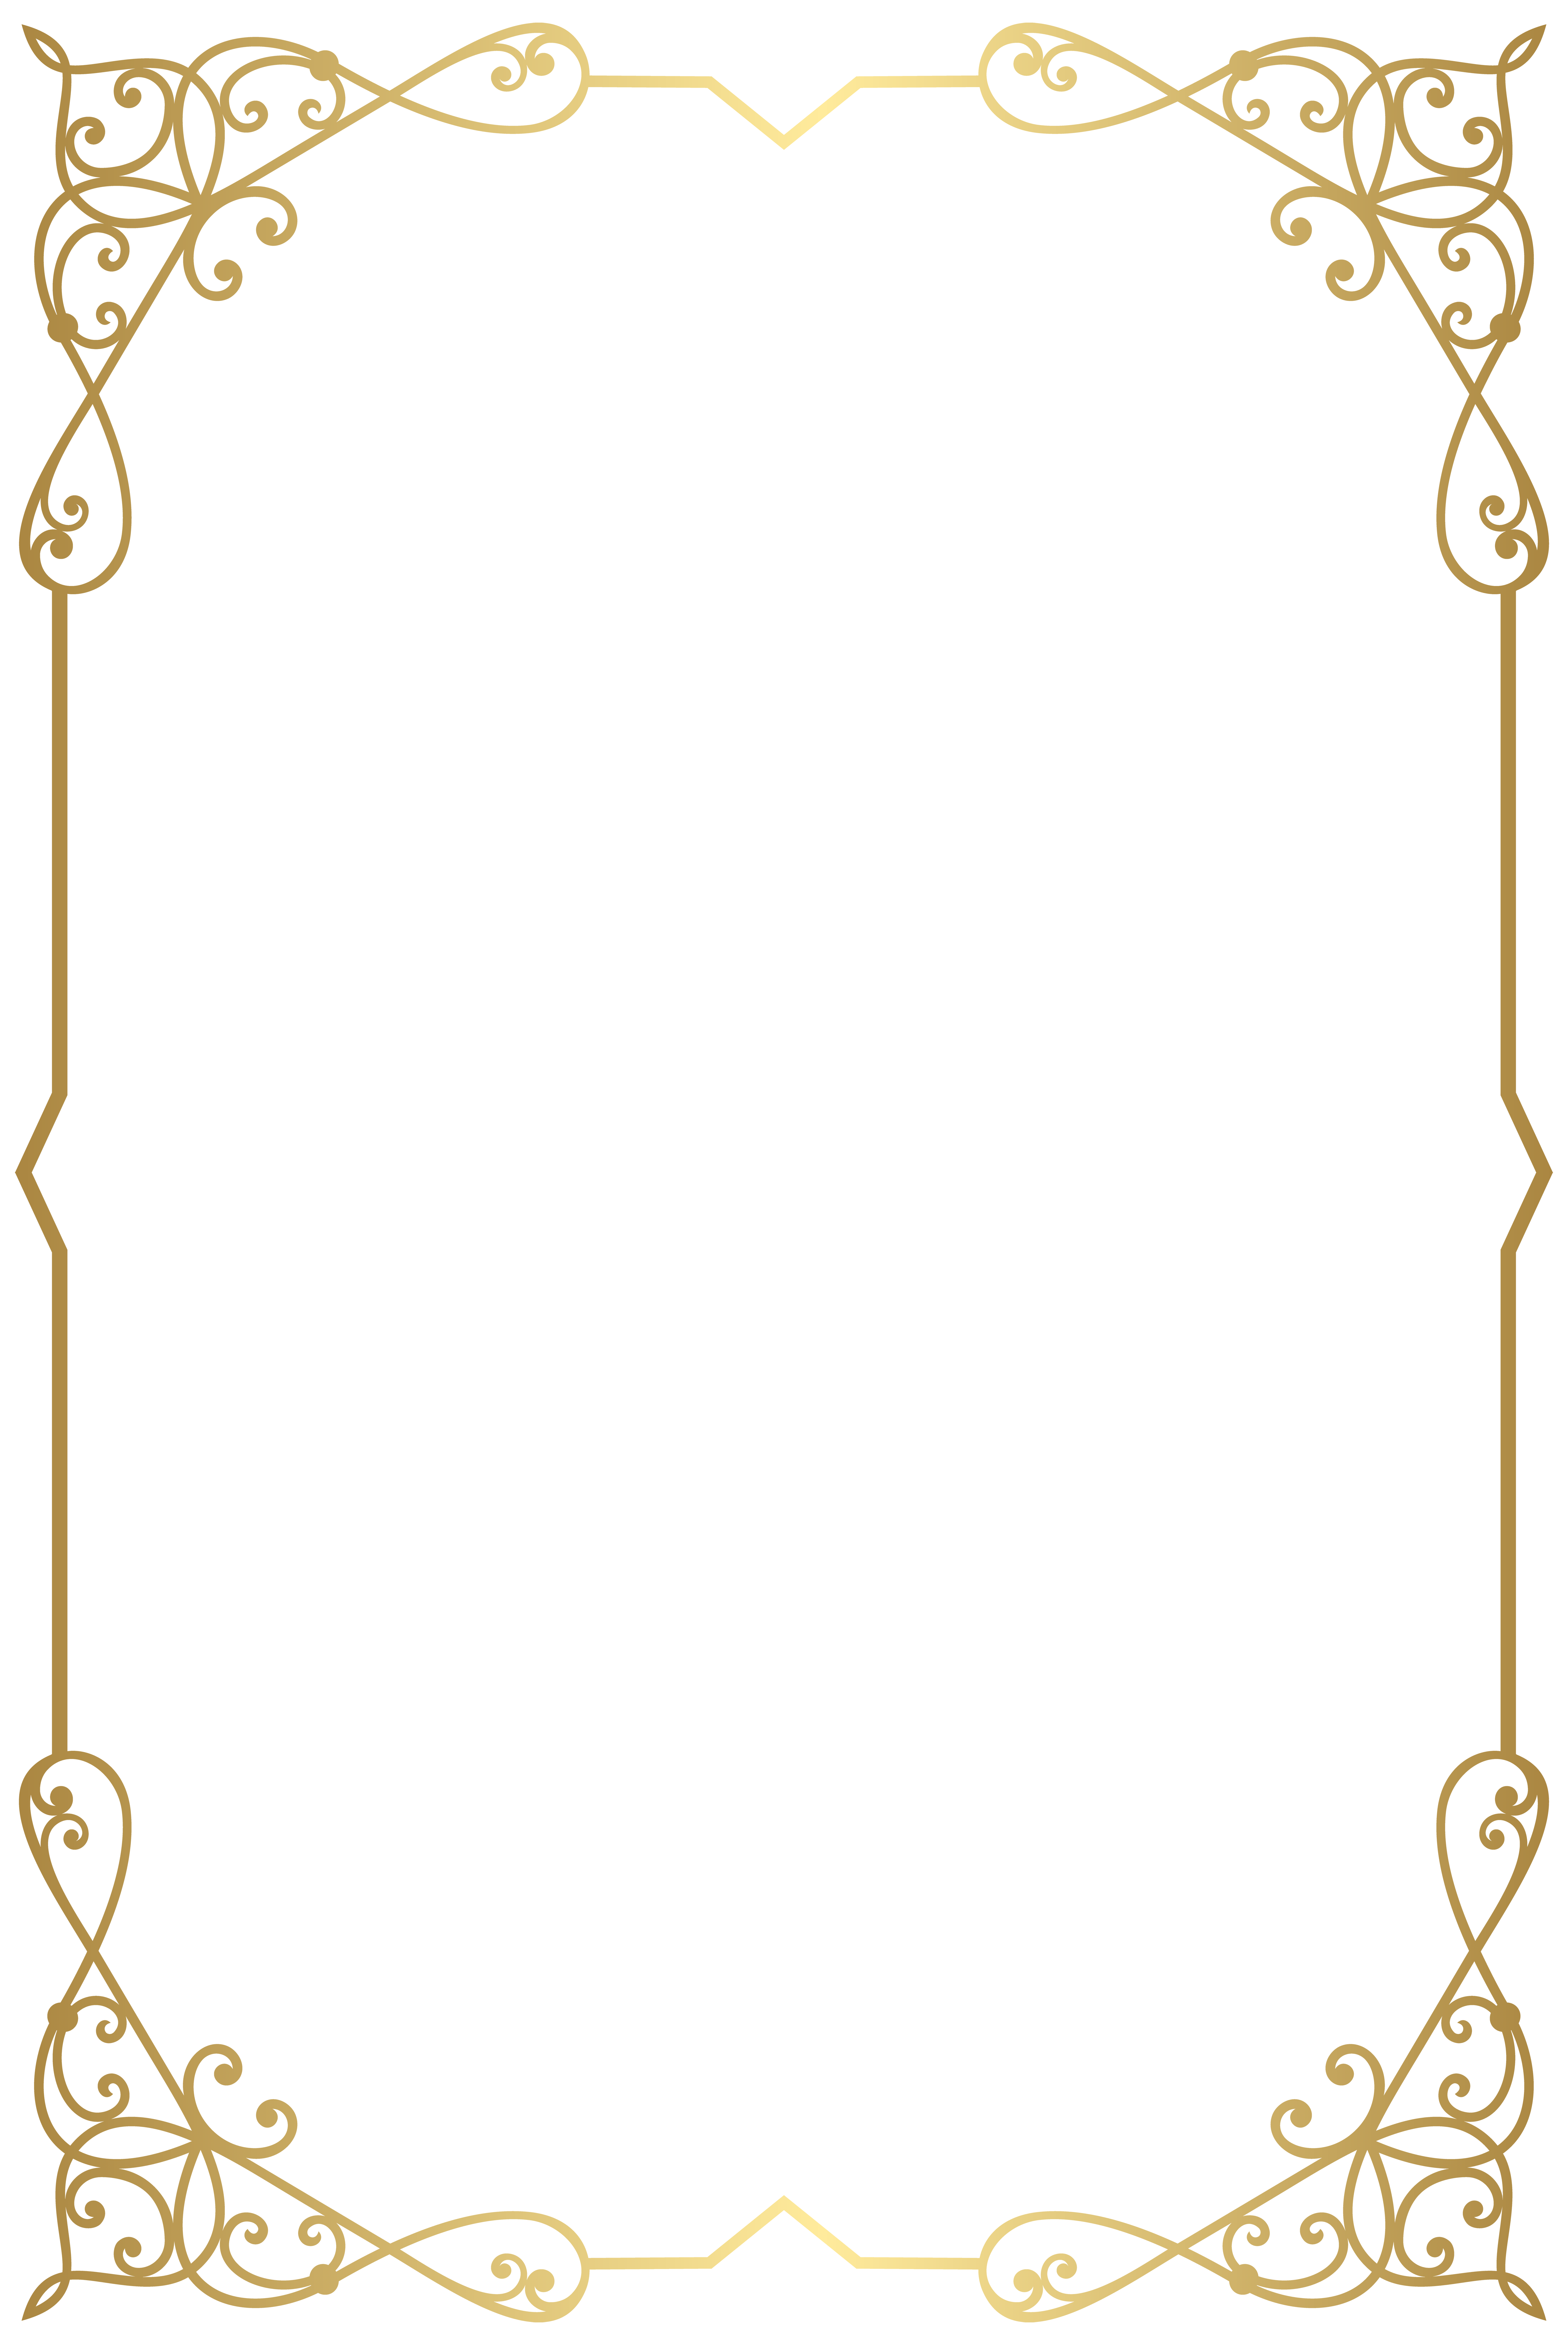 Decorative Frame Border Png Clip Art Image Gallery Yopriceville High Quality Images And Transparent Png Free Clipart